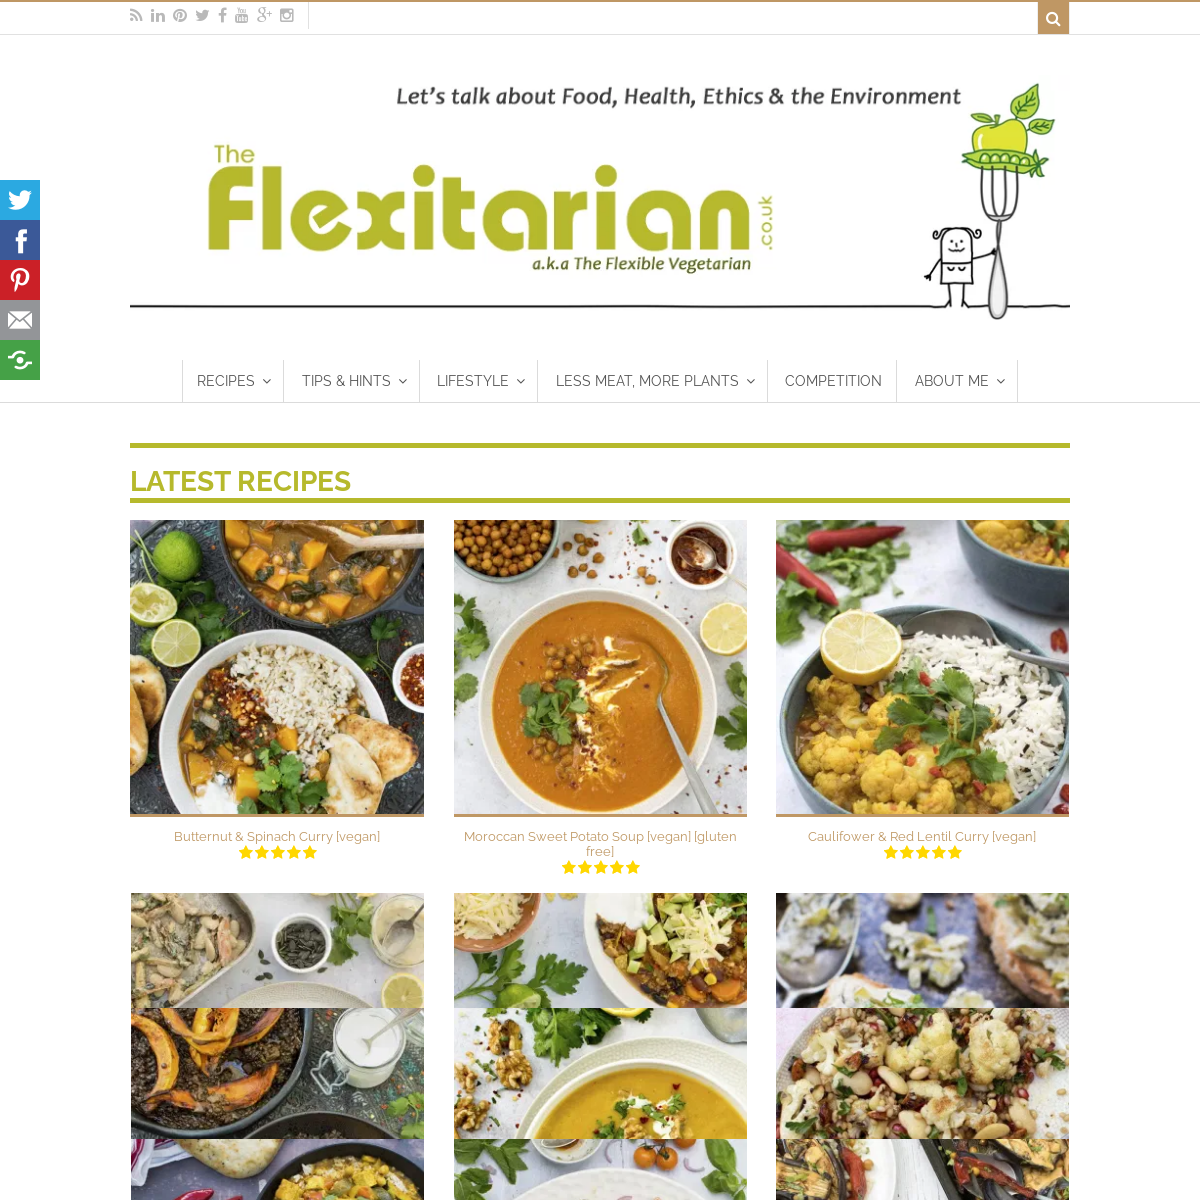 A complete backup of theflexitarian.co.uk